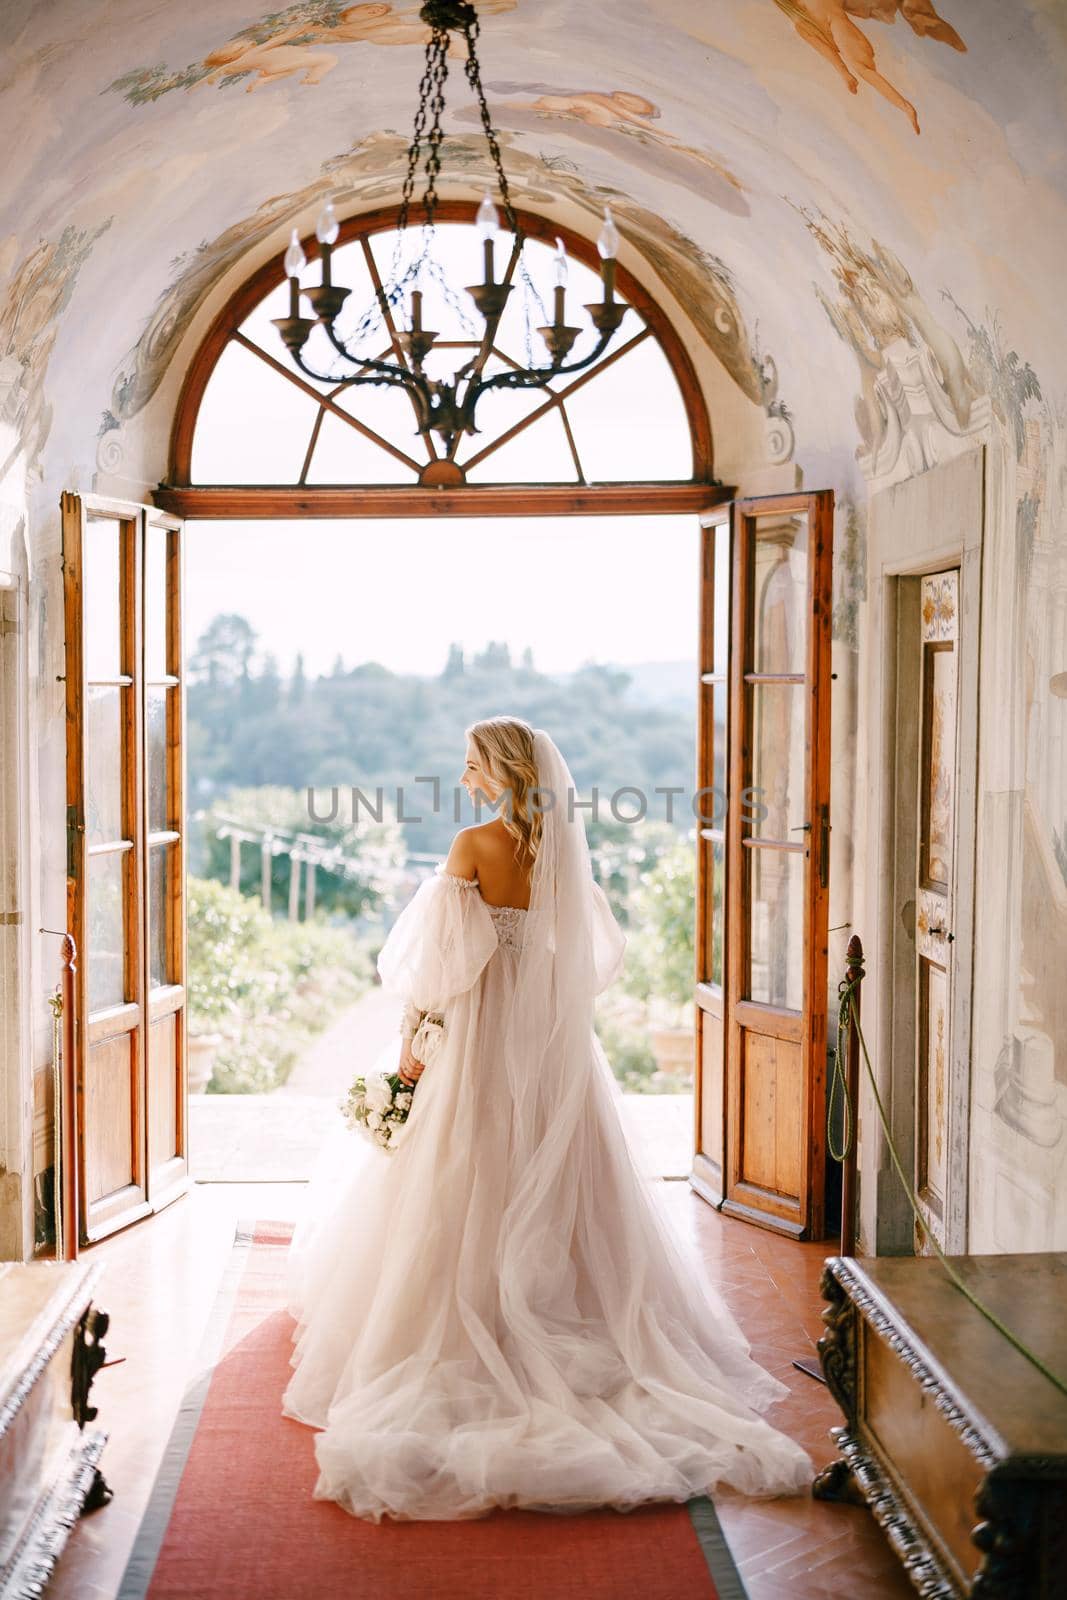 The bride walks in the interior of the villa, overlooking the garden. Wedding at an old winery villa in Tuscany, Italy.